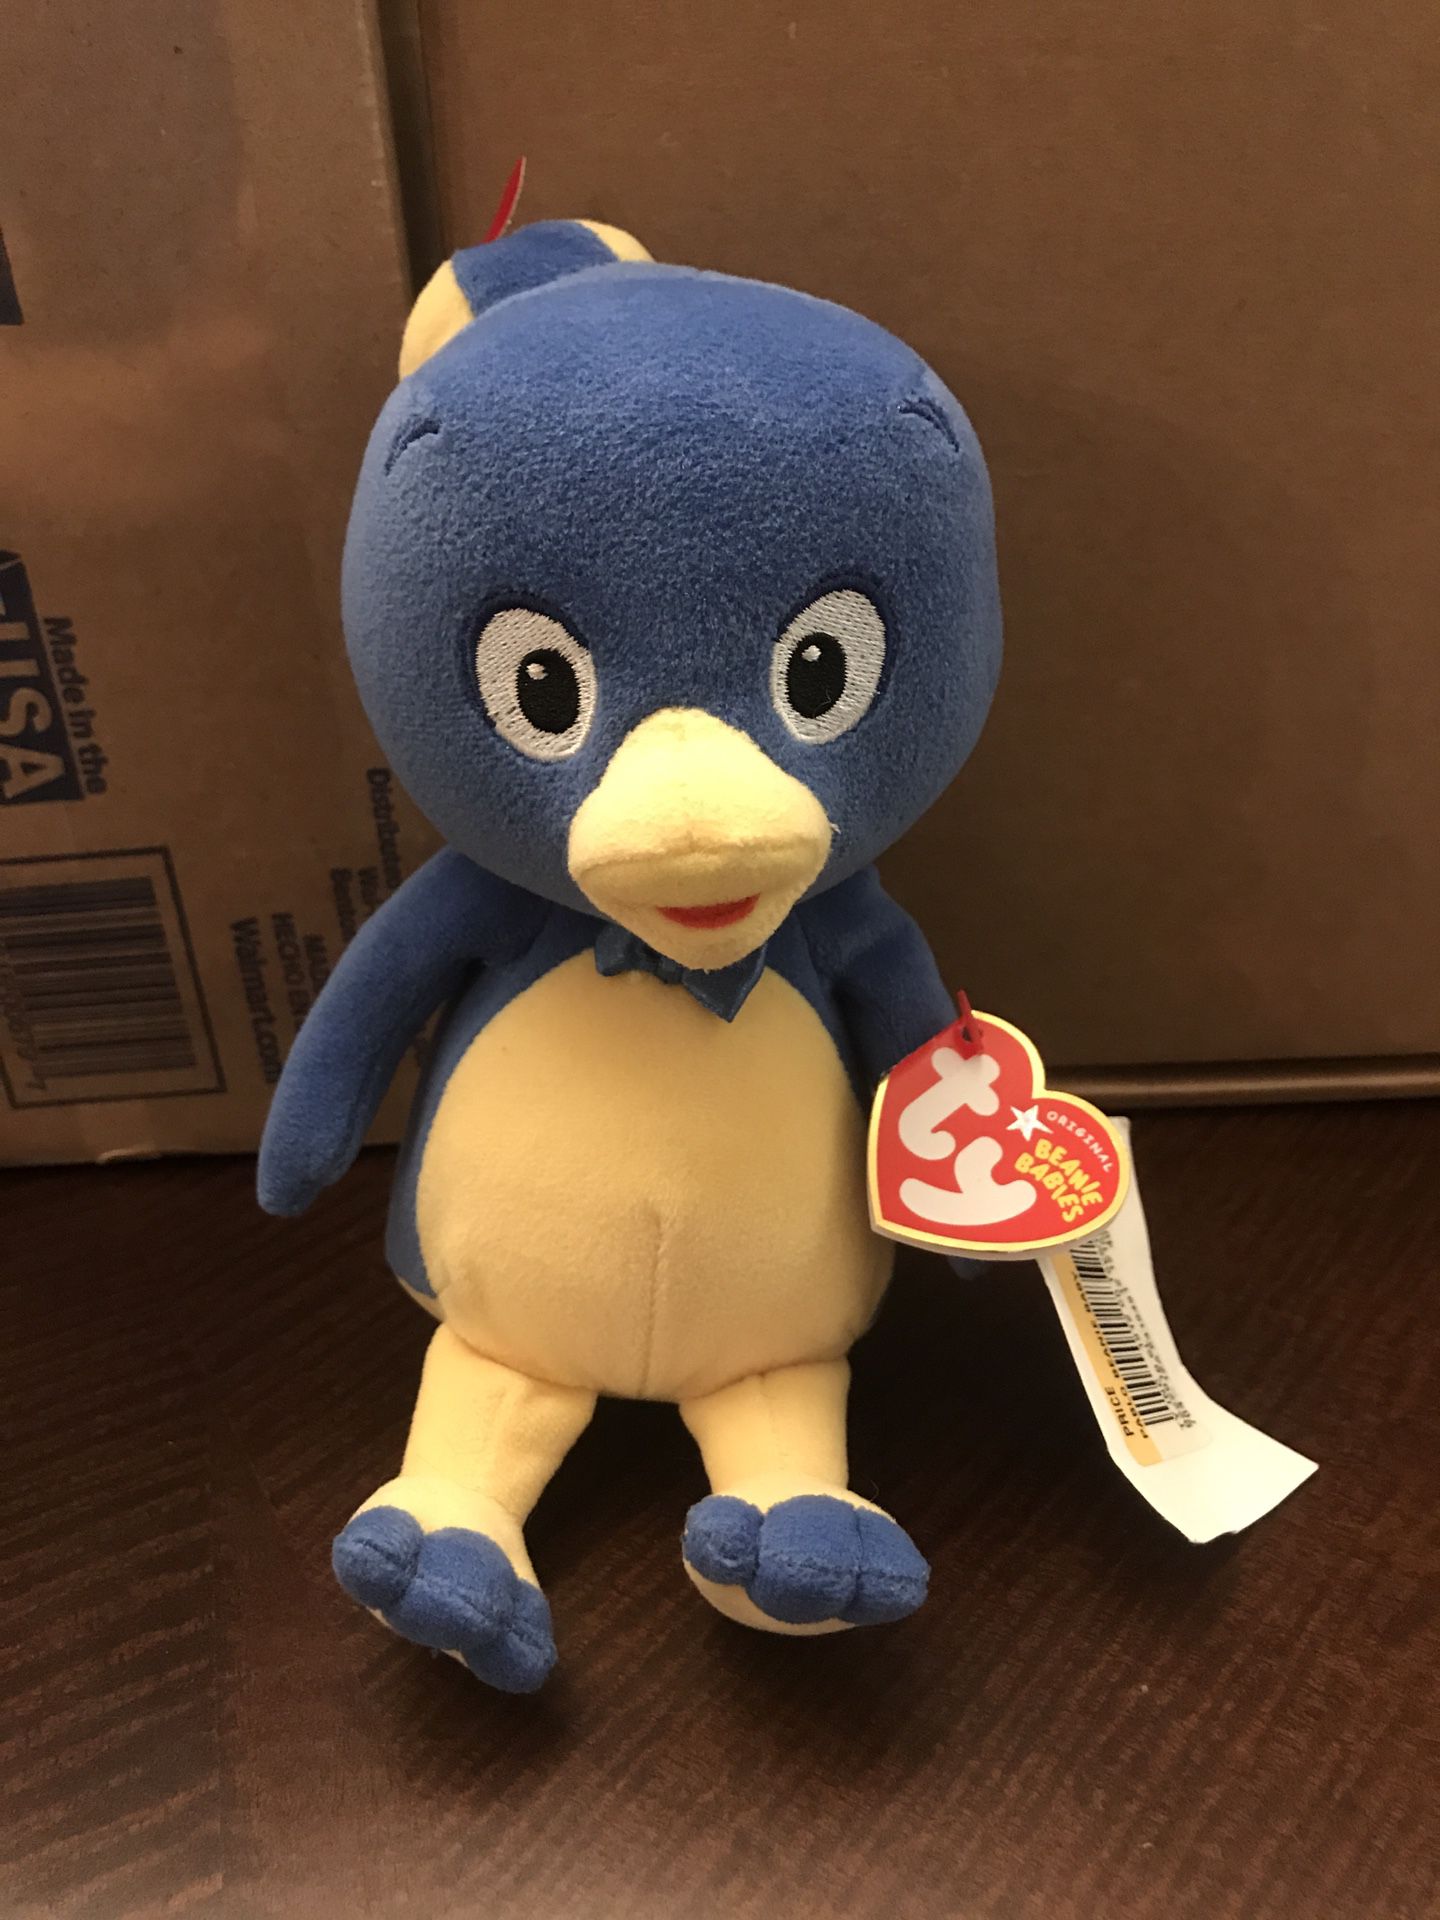 Rare! Ty beanie babies Pablo from the Backyardigans